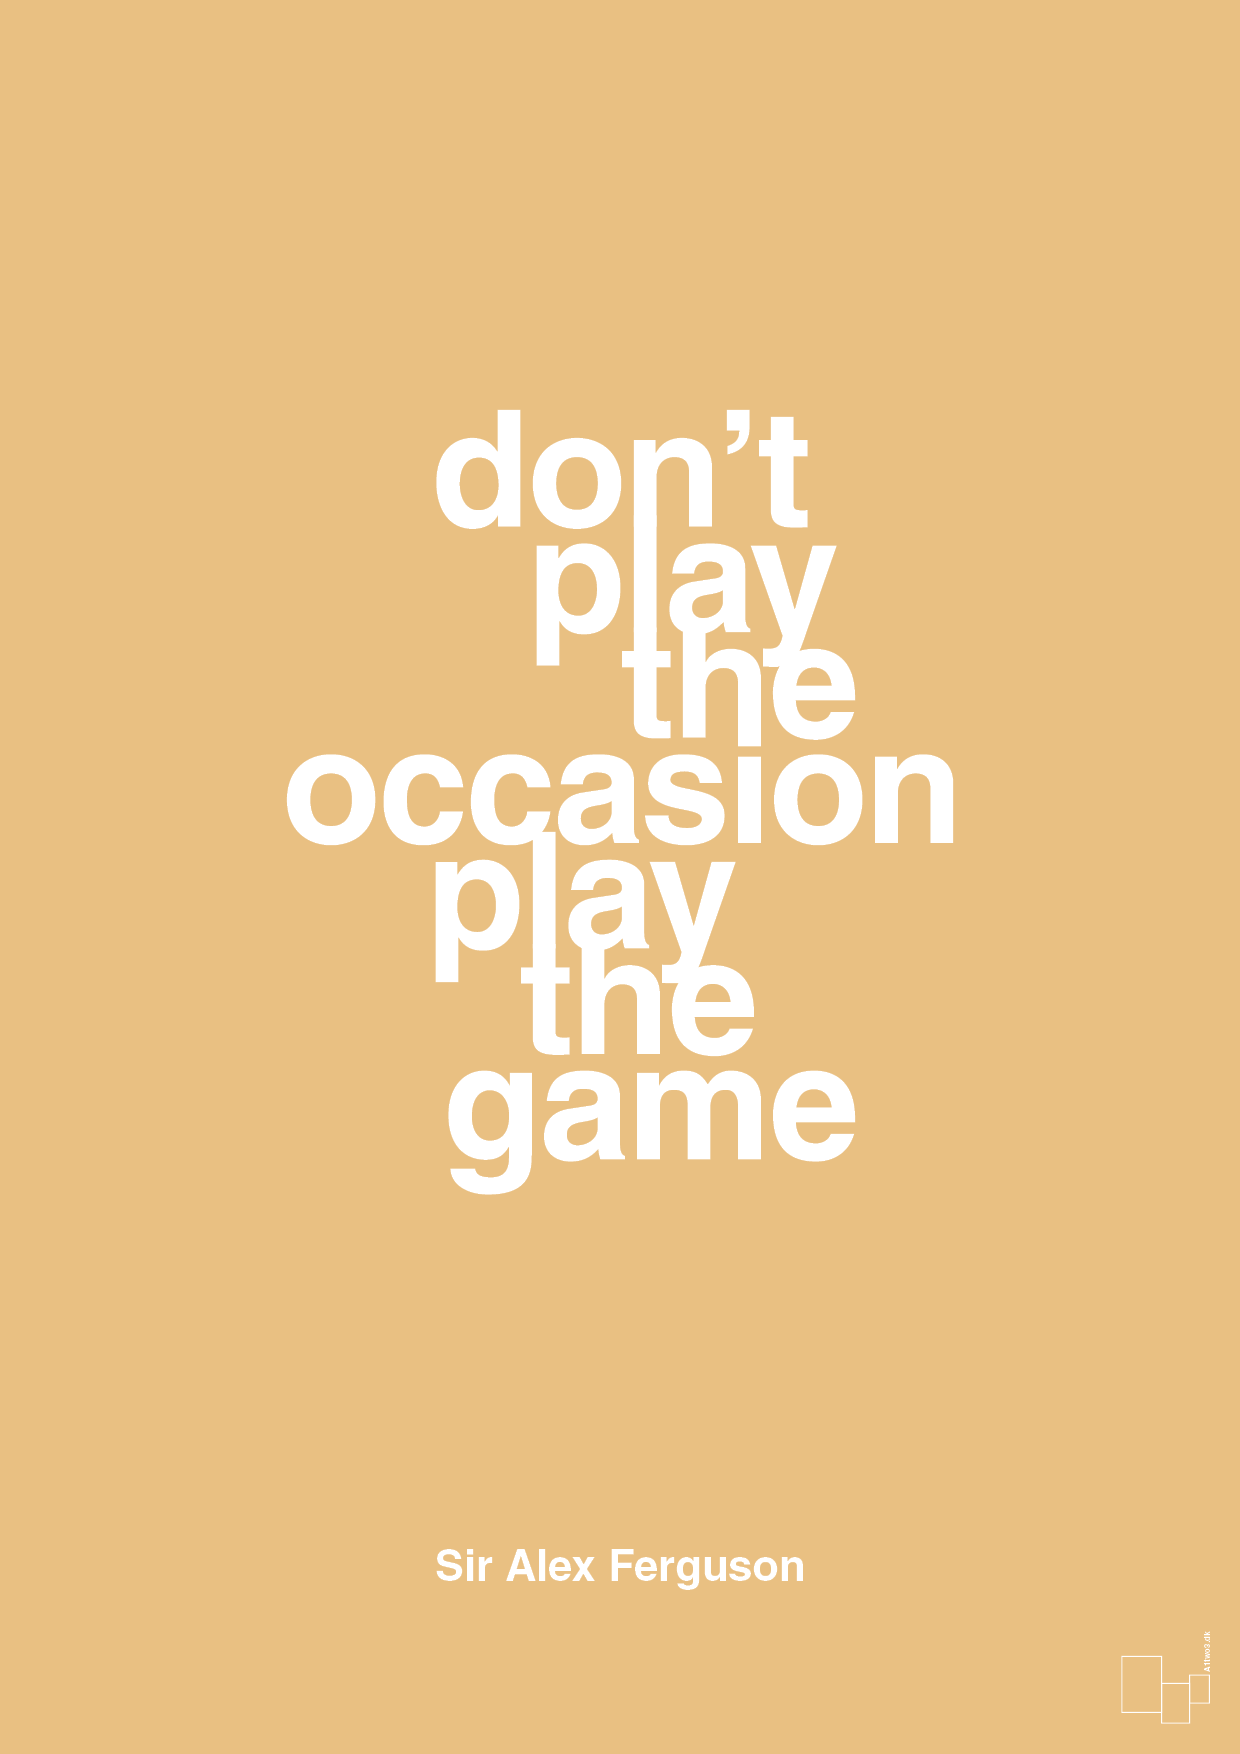 don’t play the occasion play the game - Plakat med Citater i Charismatic